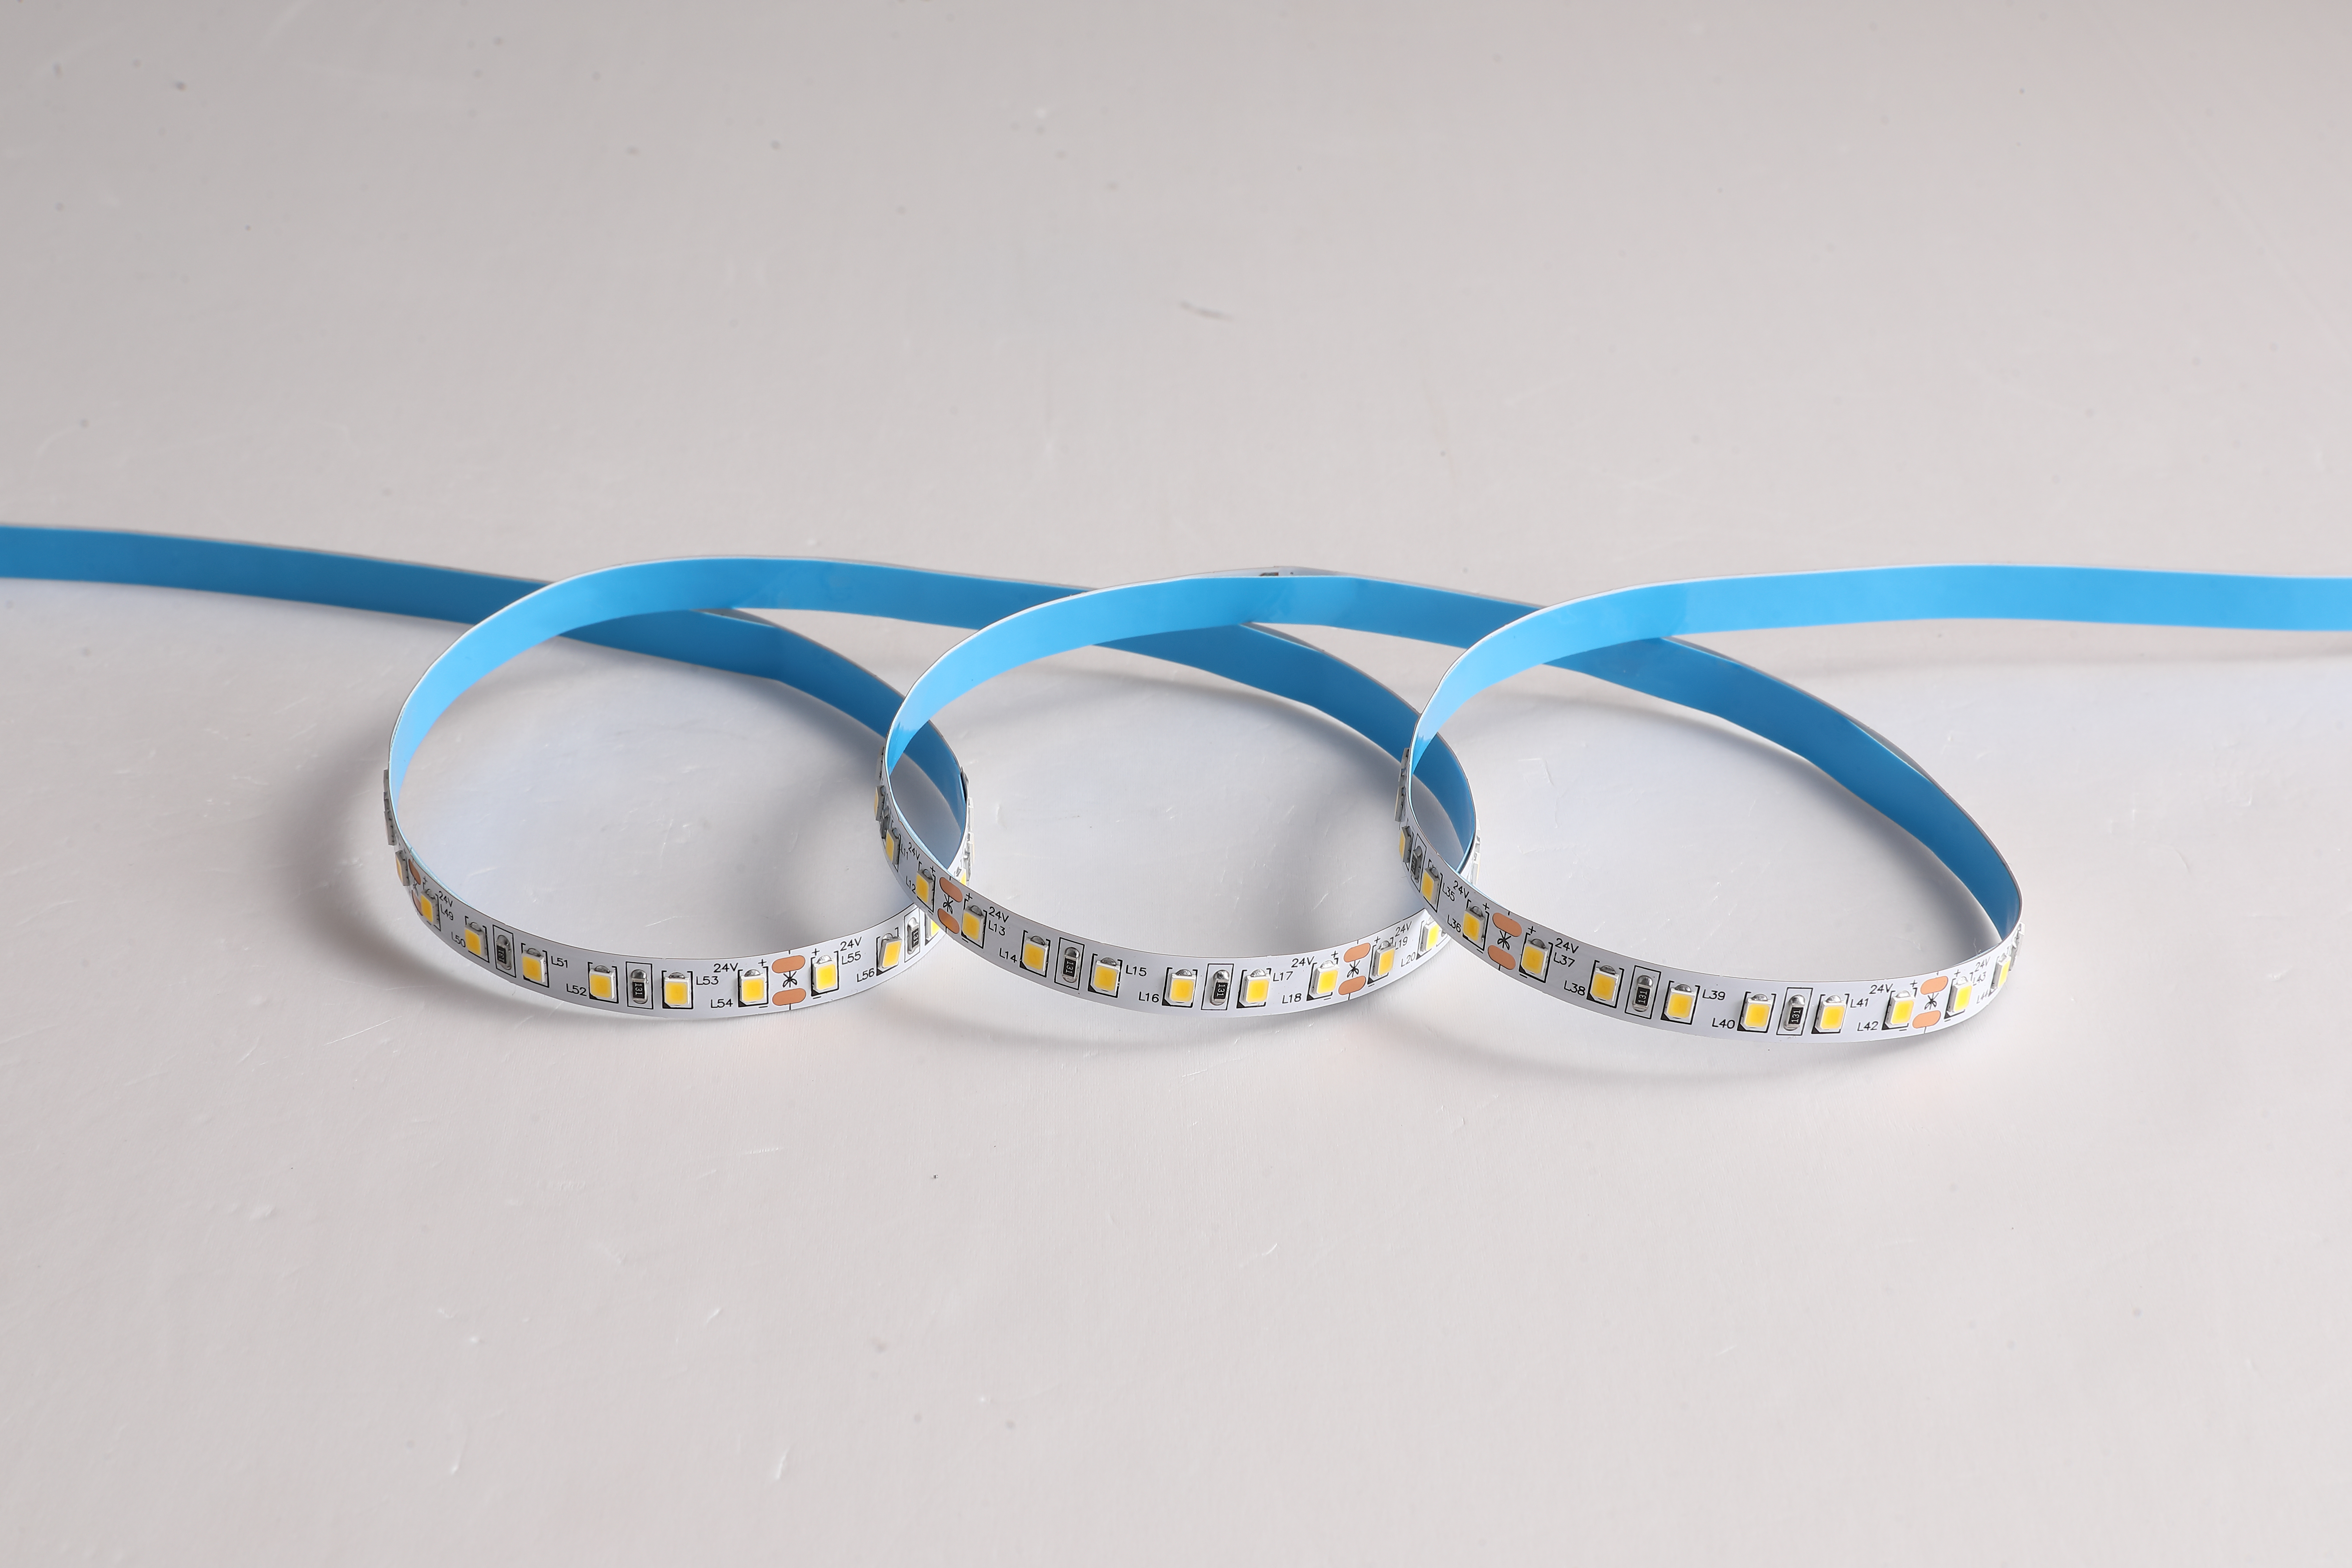 Hot New Products How To Use Diy On Led Strip Lights - DC12V SMD2835 120led chips 8mm – Joineonlux